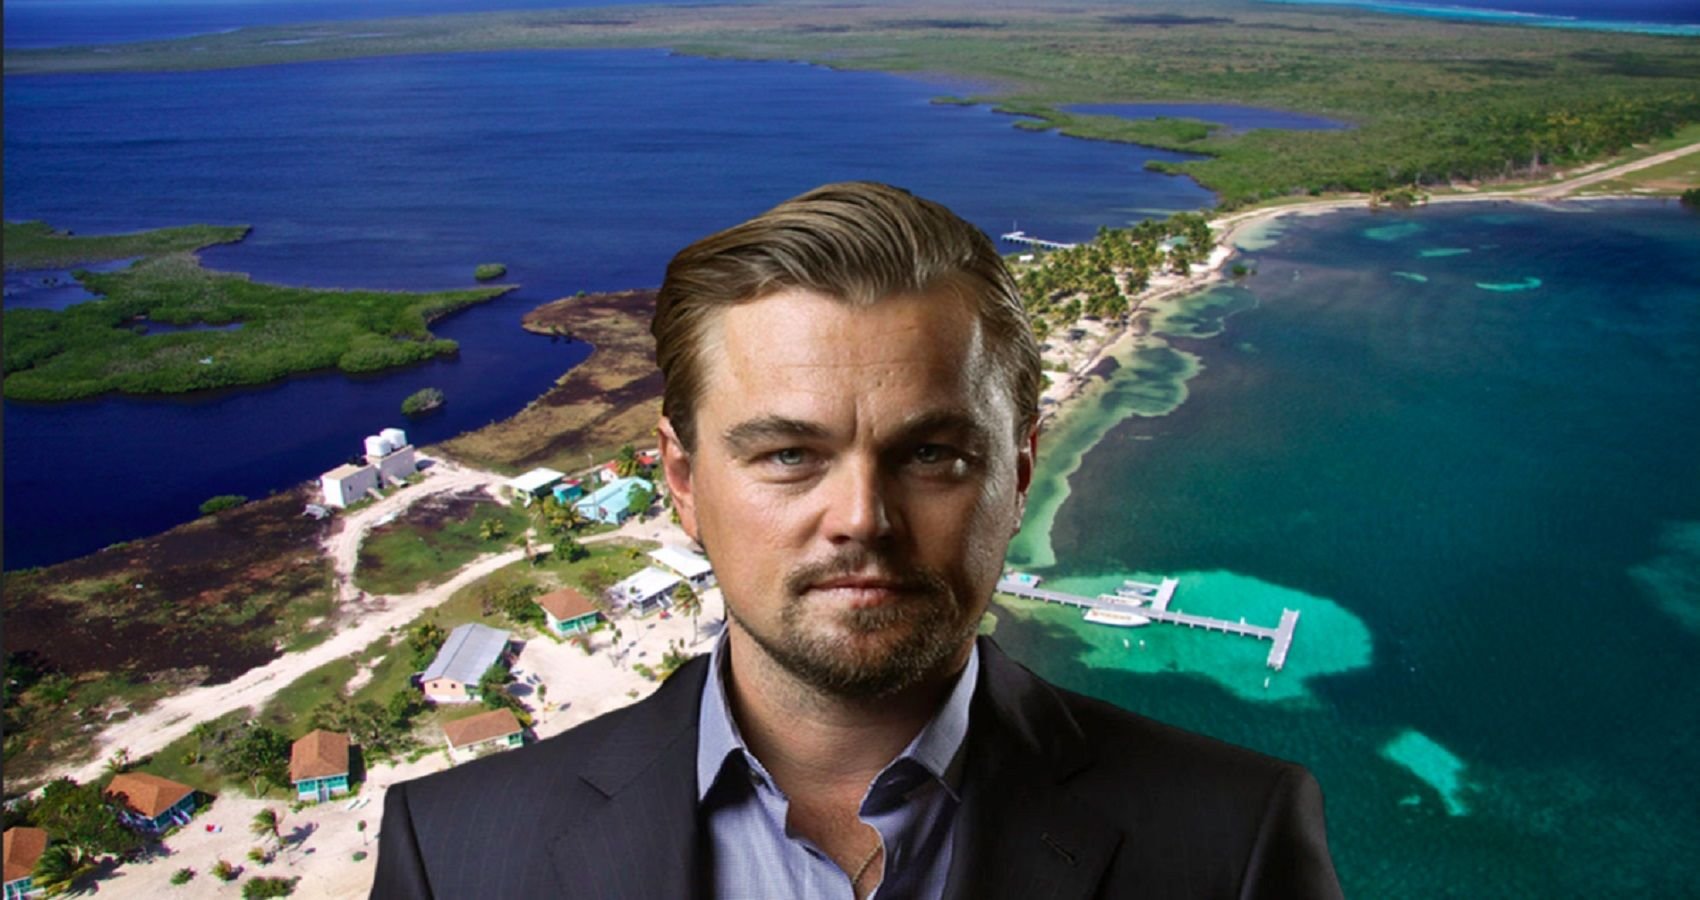 10 Celebrities You Didn't Know Owned A Private Island